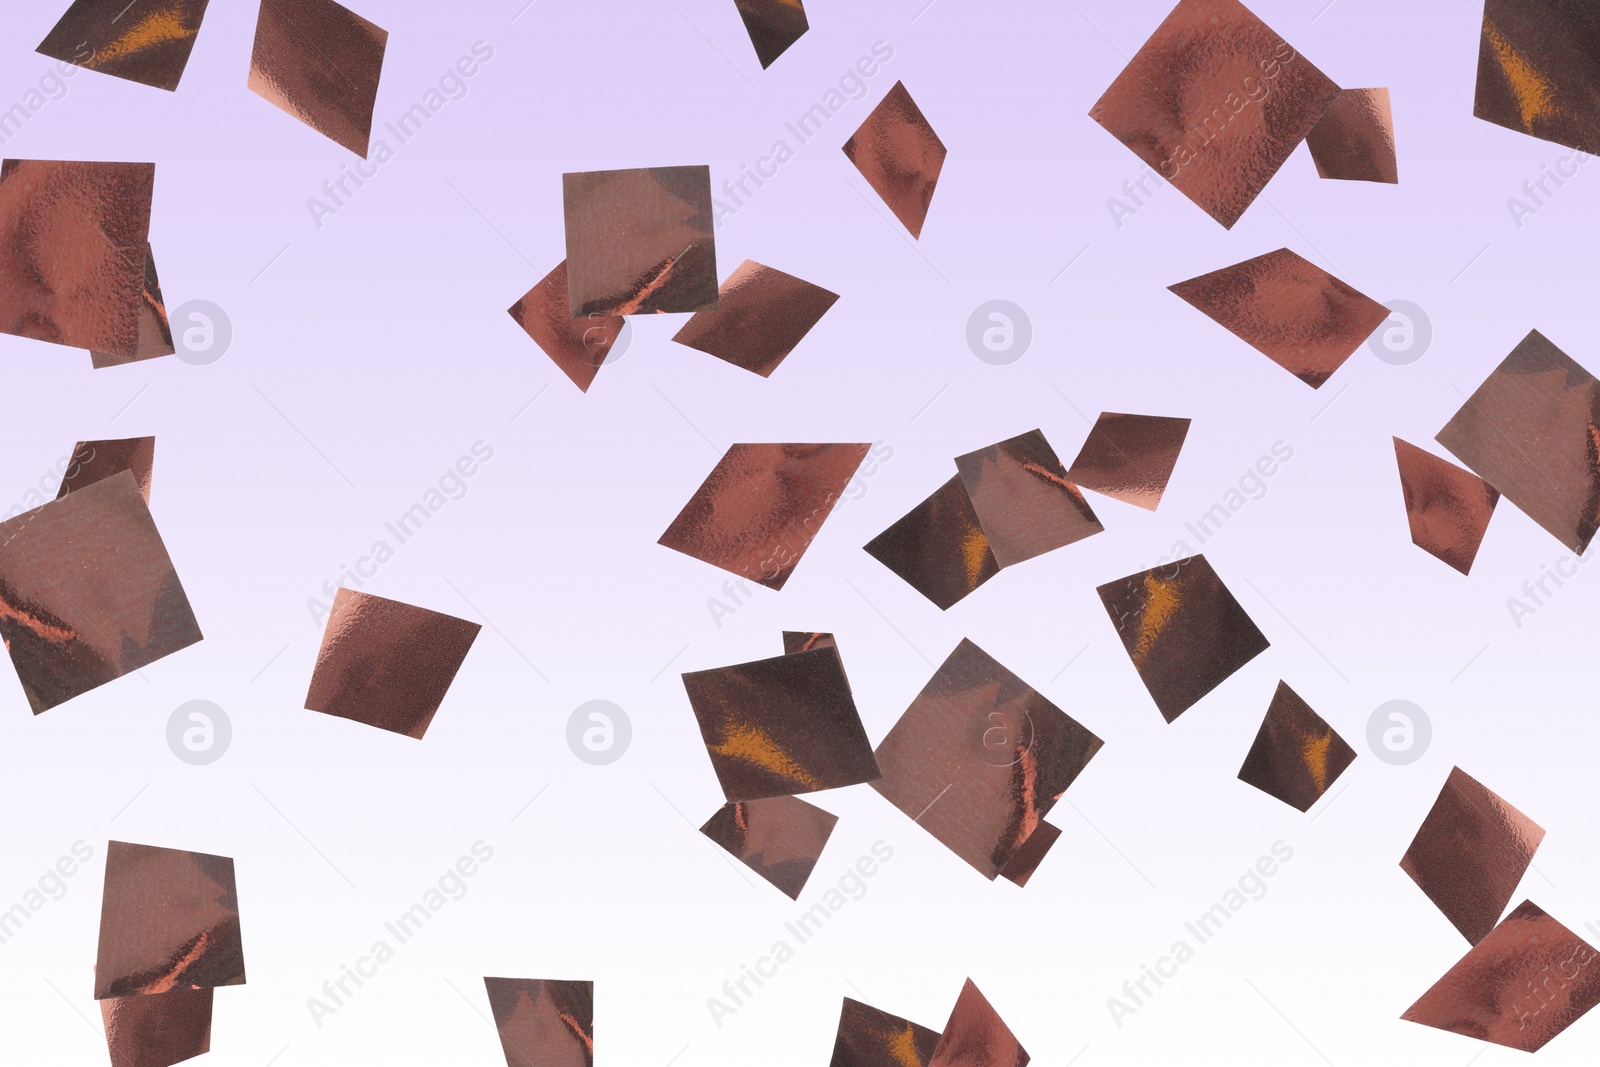 Image of Shiny bronze confetti falling on gradient background